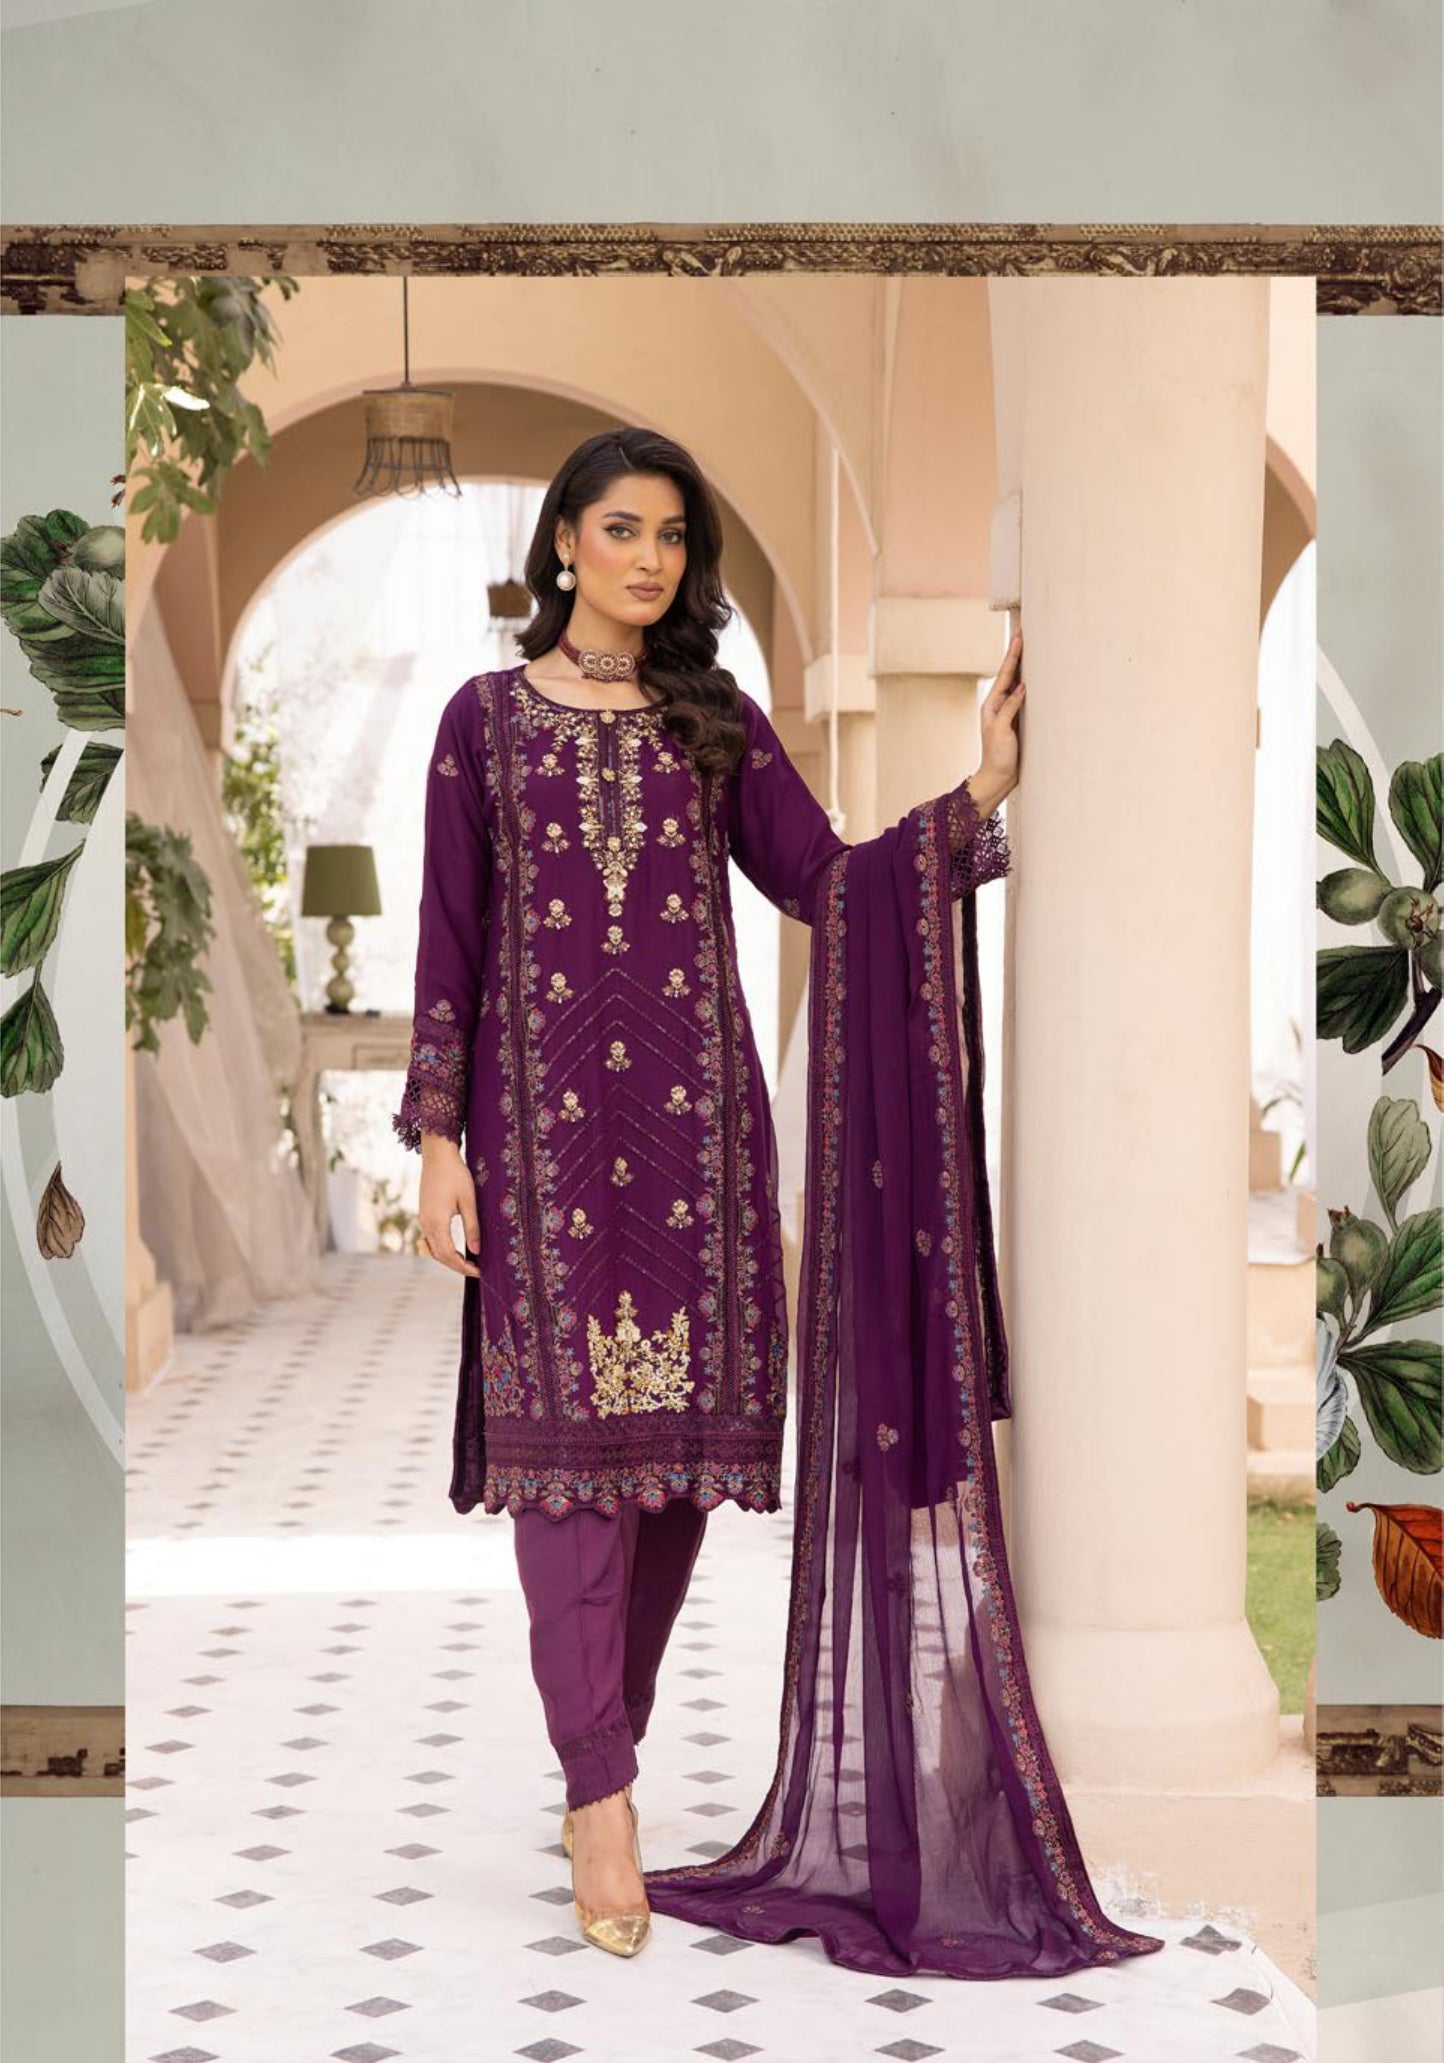 SIMRANS Agha Noor lux by Shiffonz 3 piece embroidered chiffon suit SMC5721